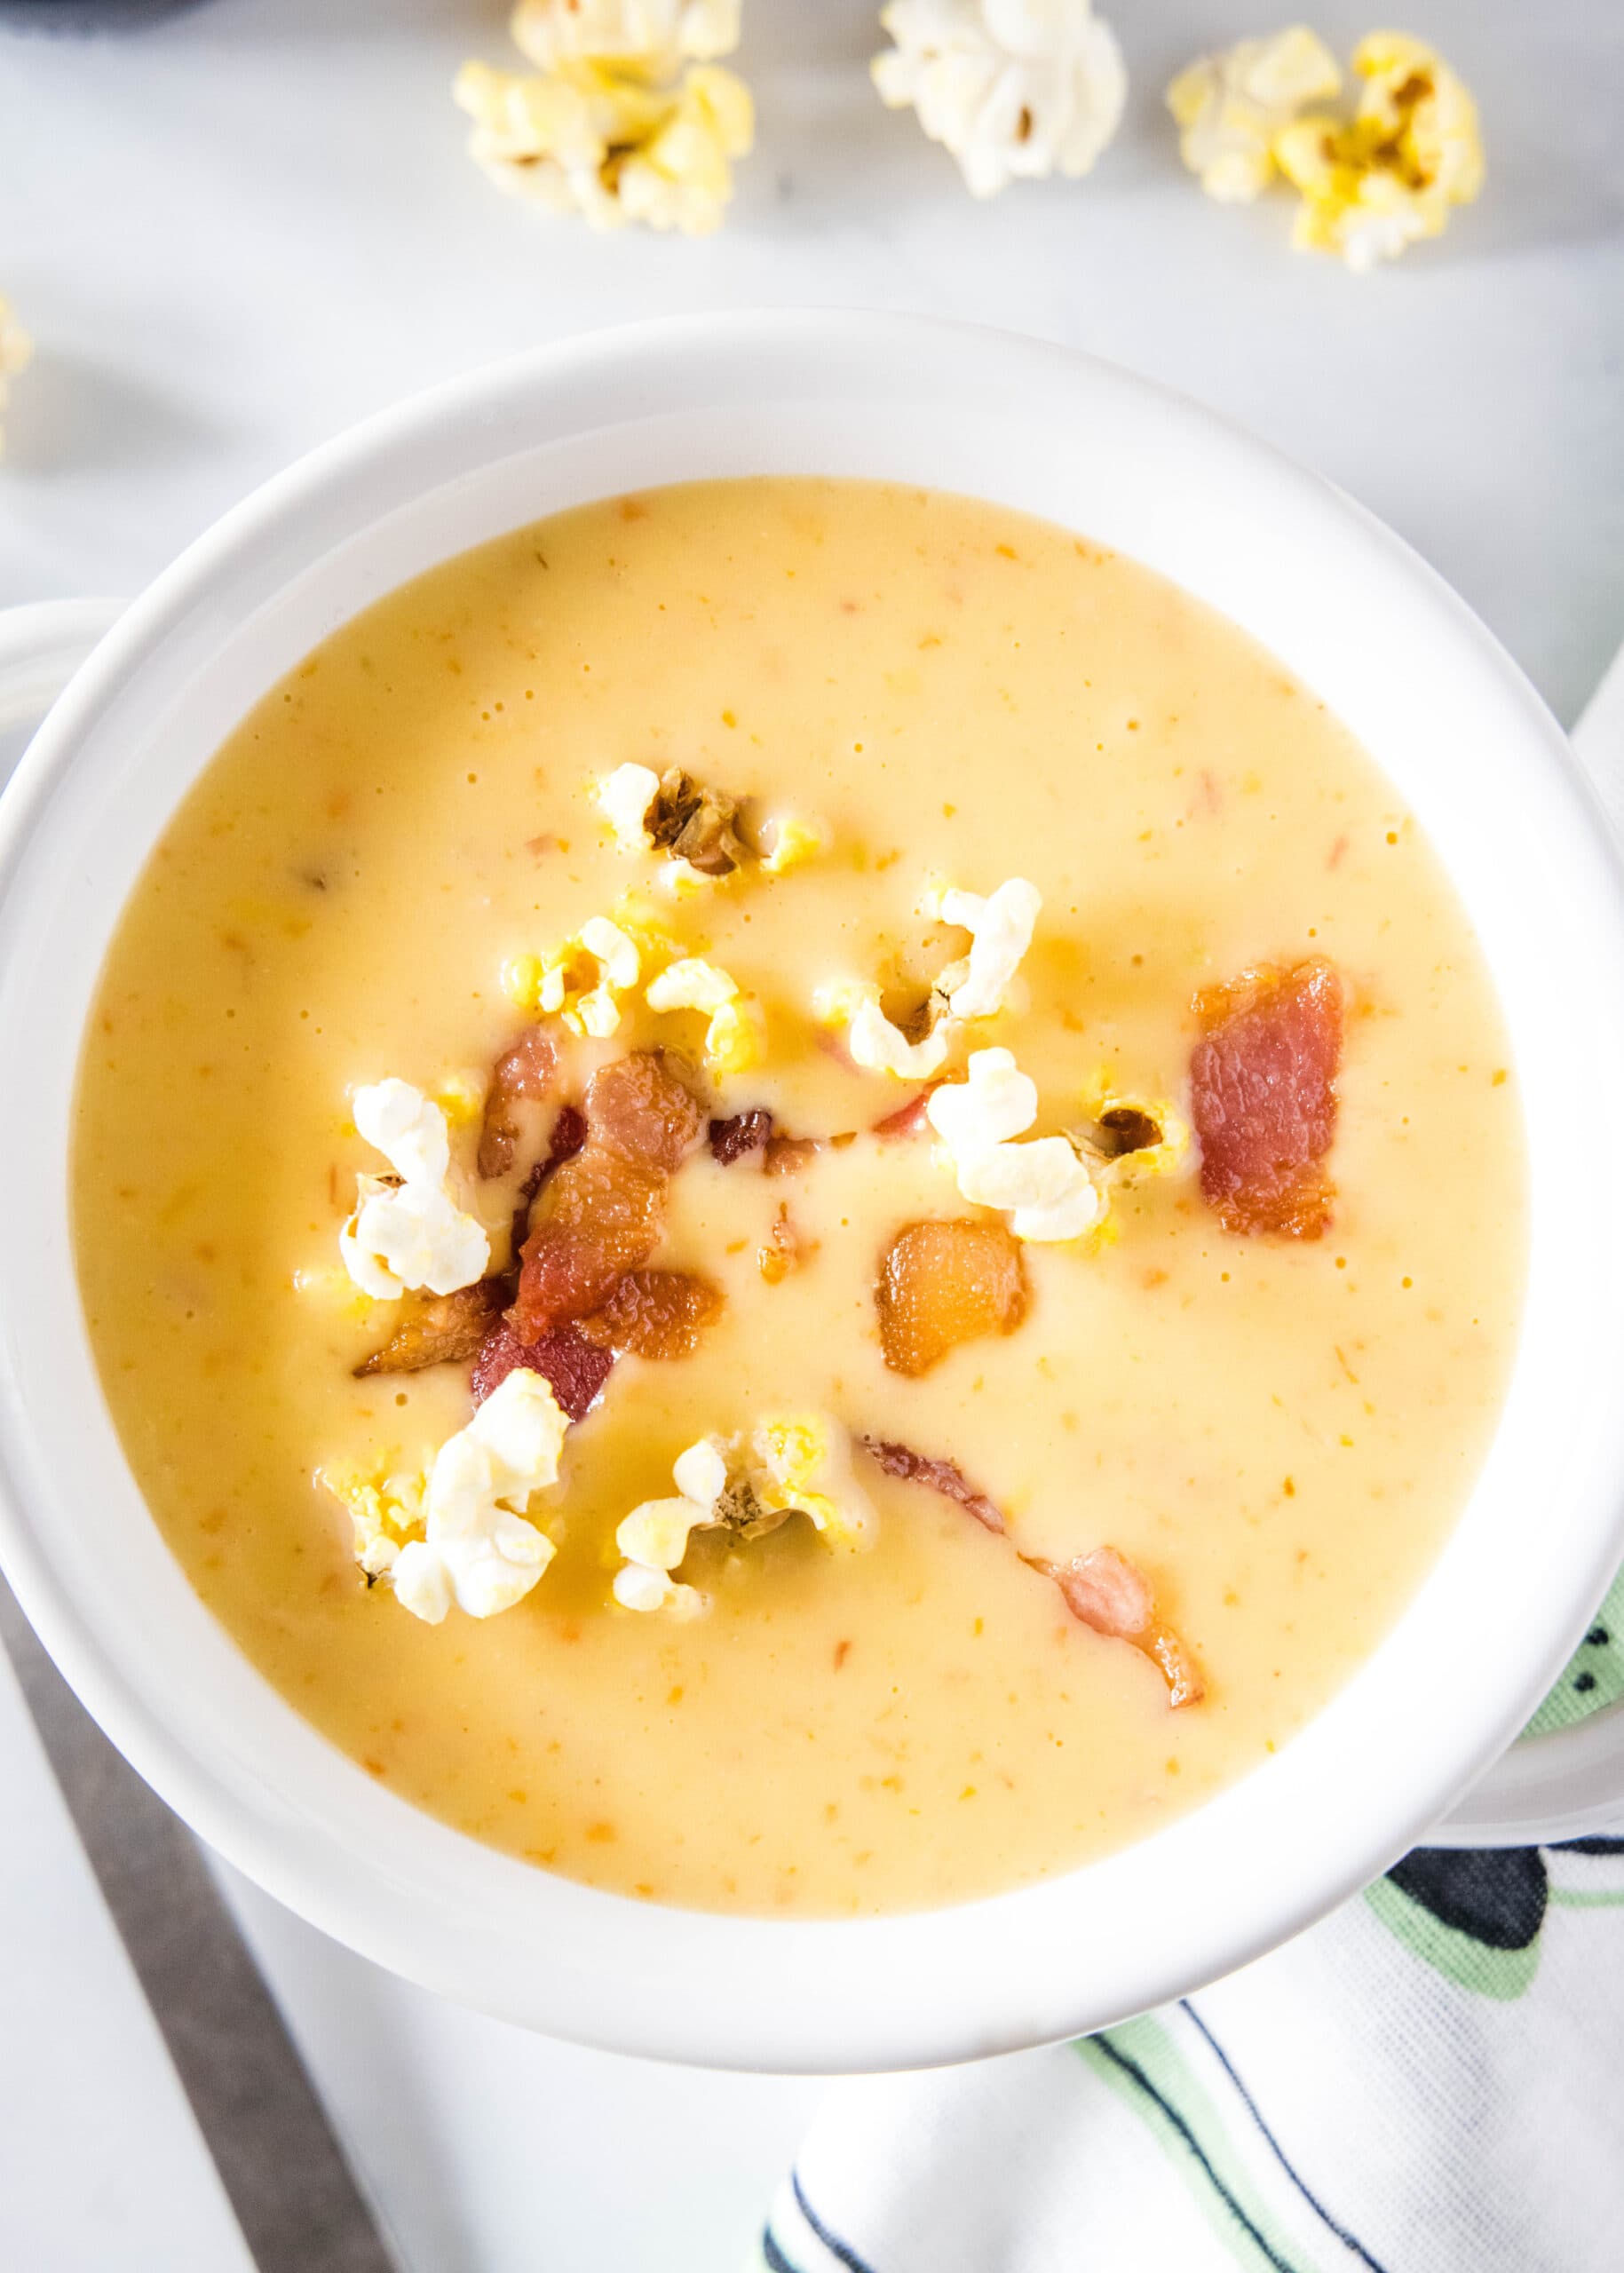 Overhead view of a bowl of cheese soup topped with popcorn and bacon, with some popcorn on the side